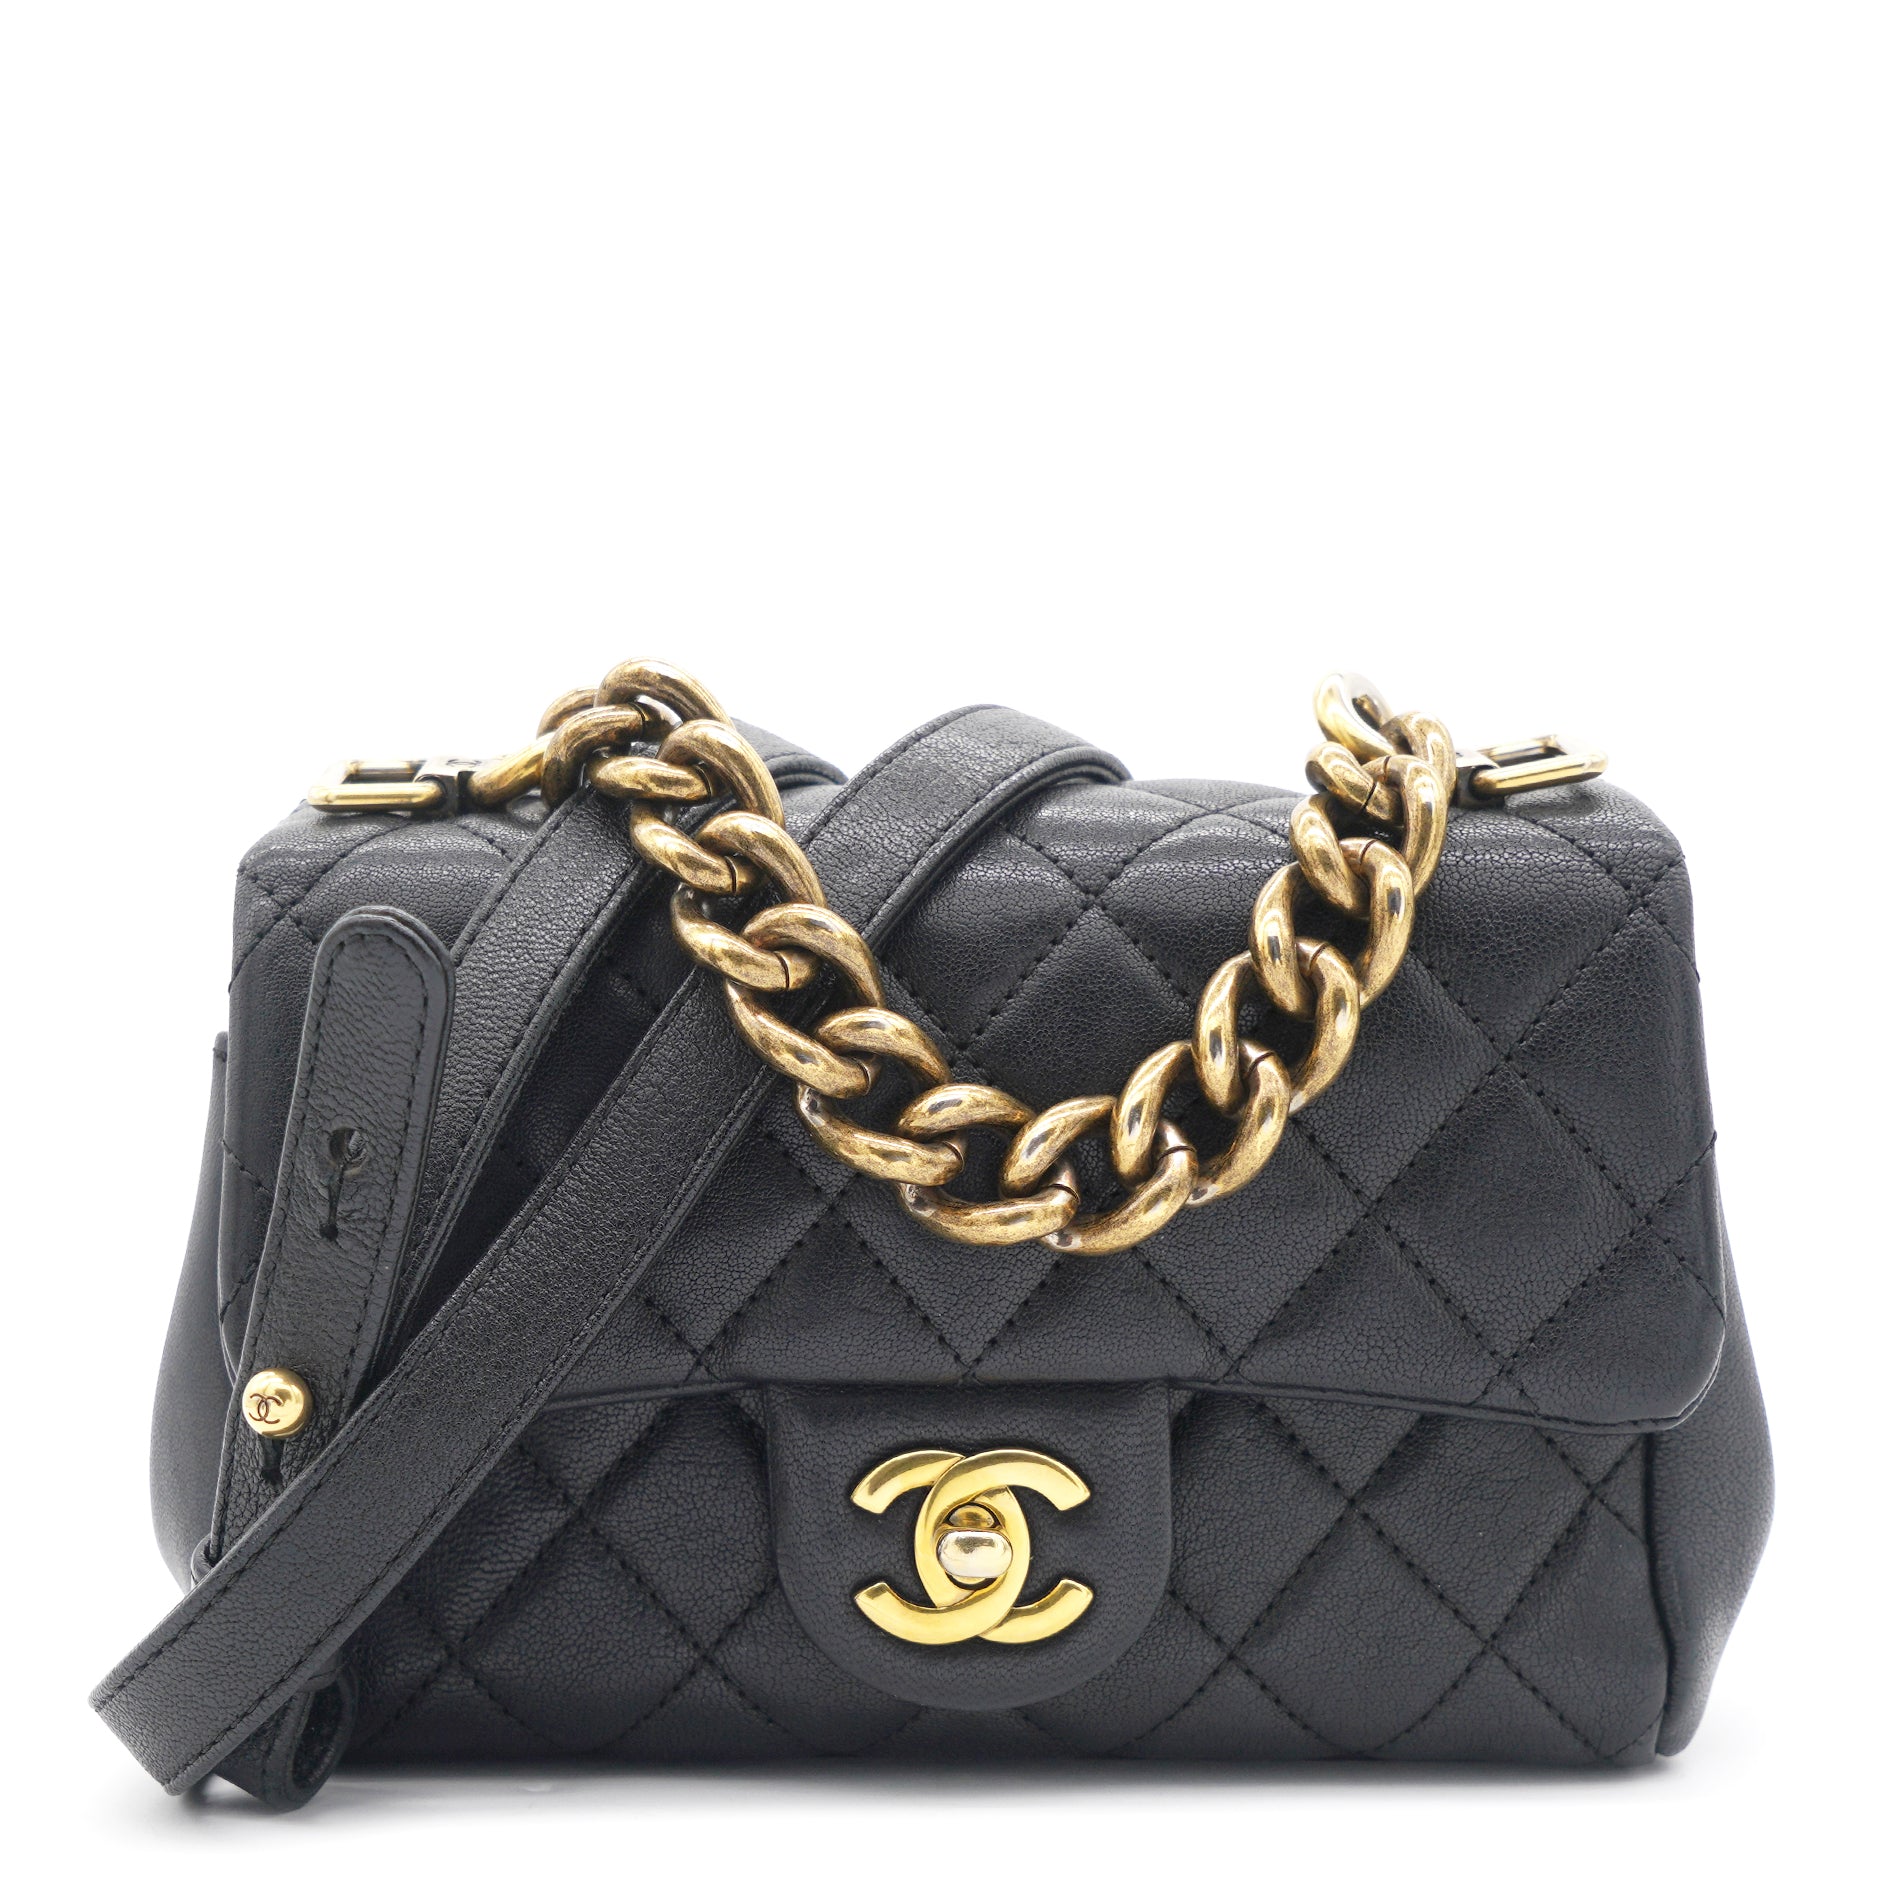 CHANEL PRICE INCREASE IN EUROPE 2022  Bag Religion